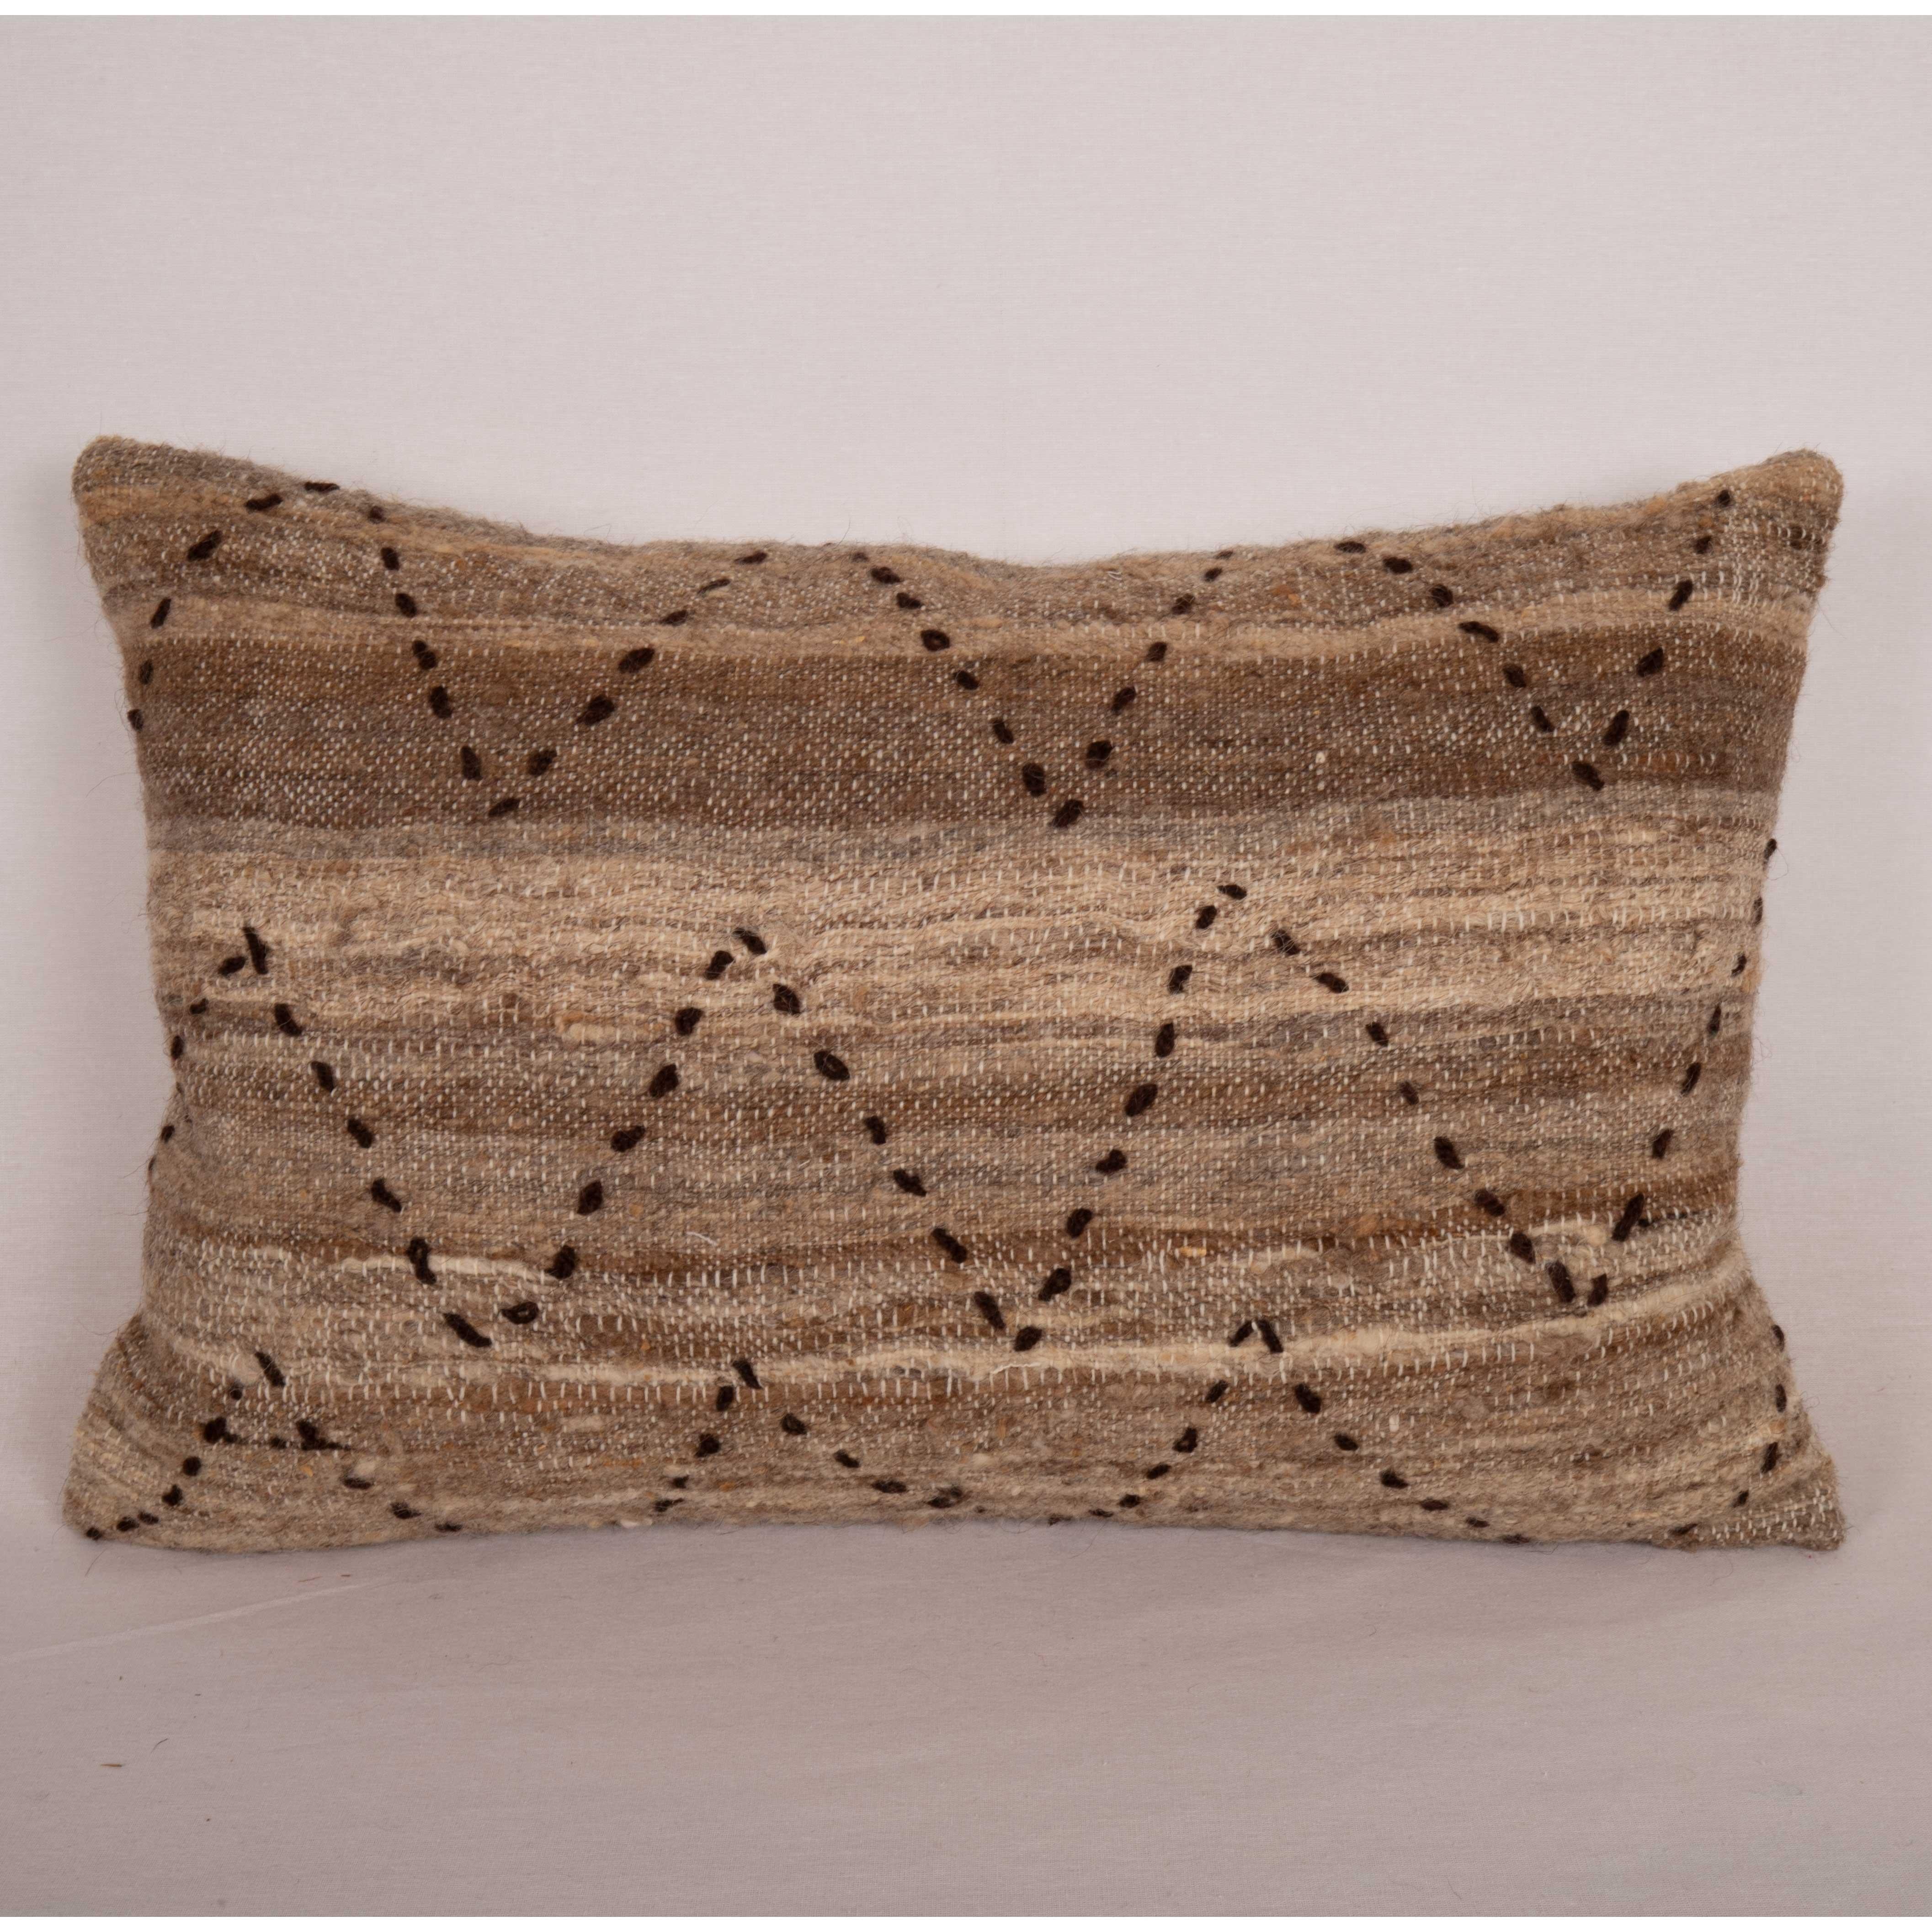 Hand-Woven Neutral Pillow Case Made from a Vintage  Wool Cover, Mid-20th C For Sale